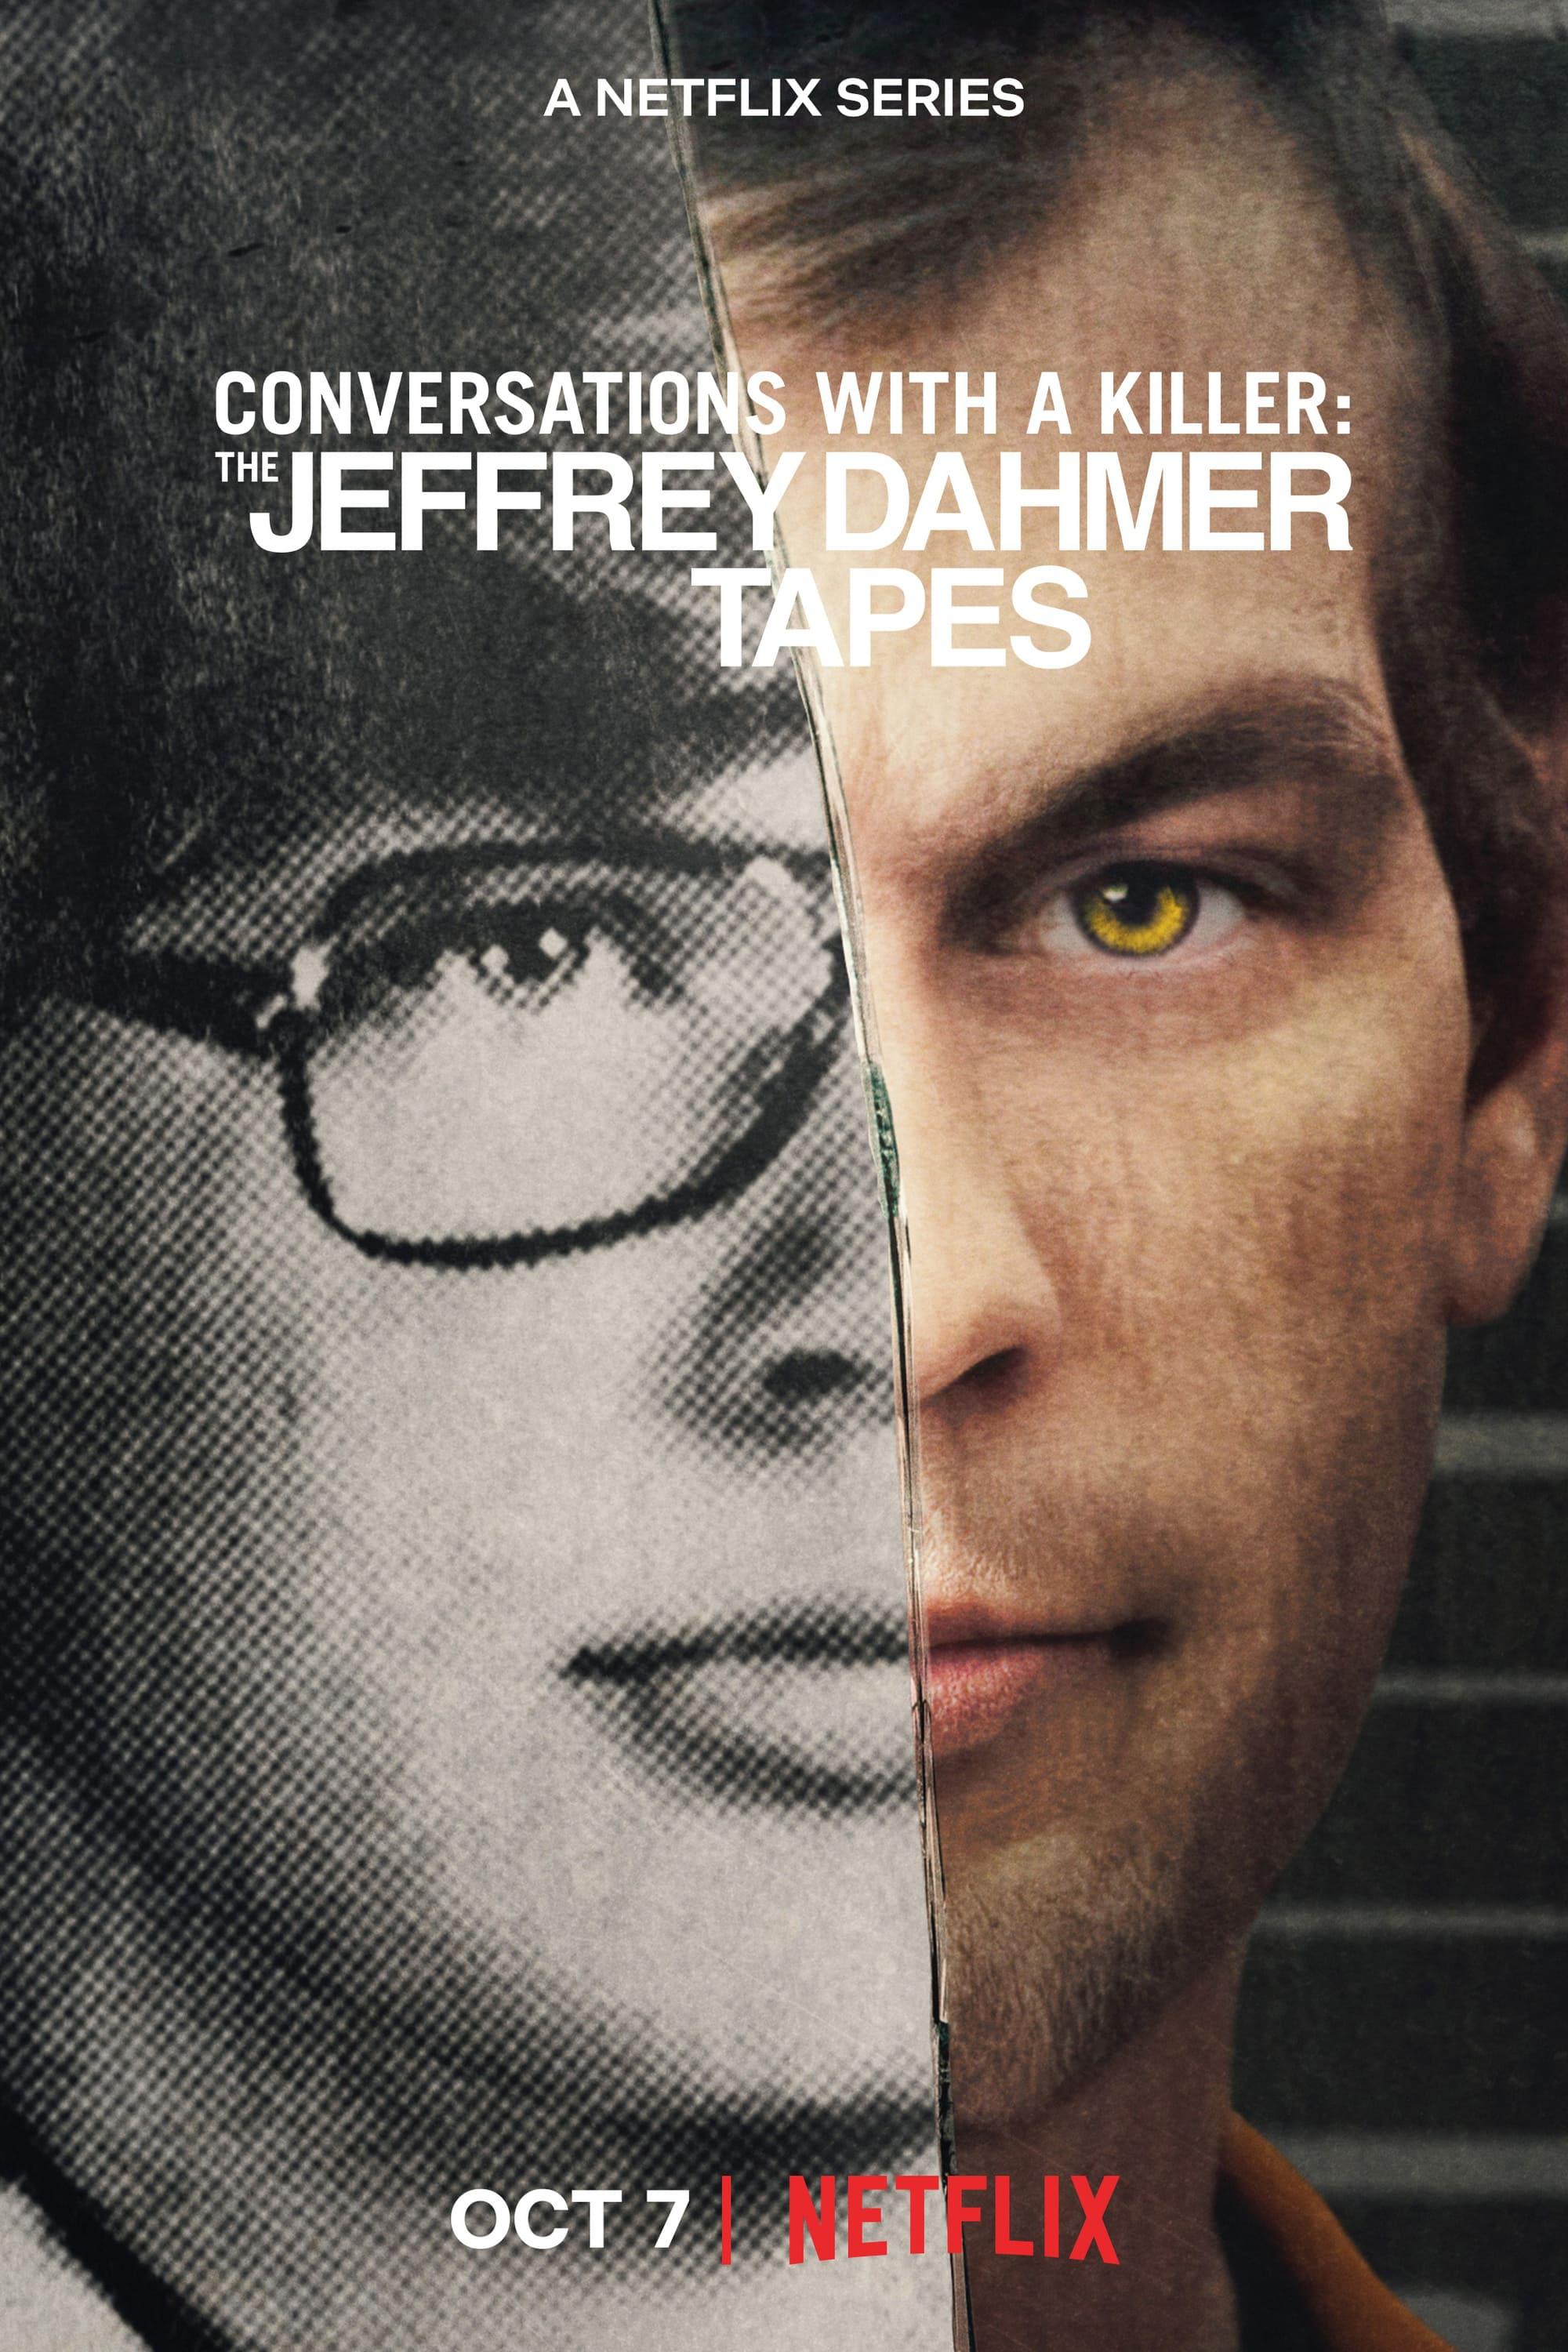 TV ratings for Conversations With A Killer: The Jeffrey Dahmer Tapes in Suecia. Netflix TV series